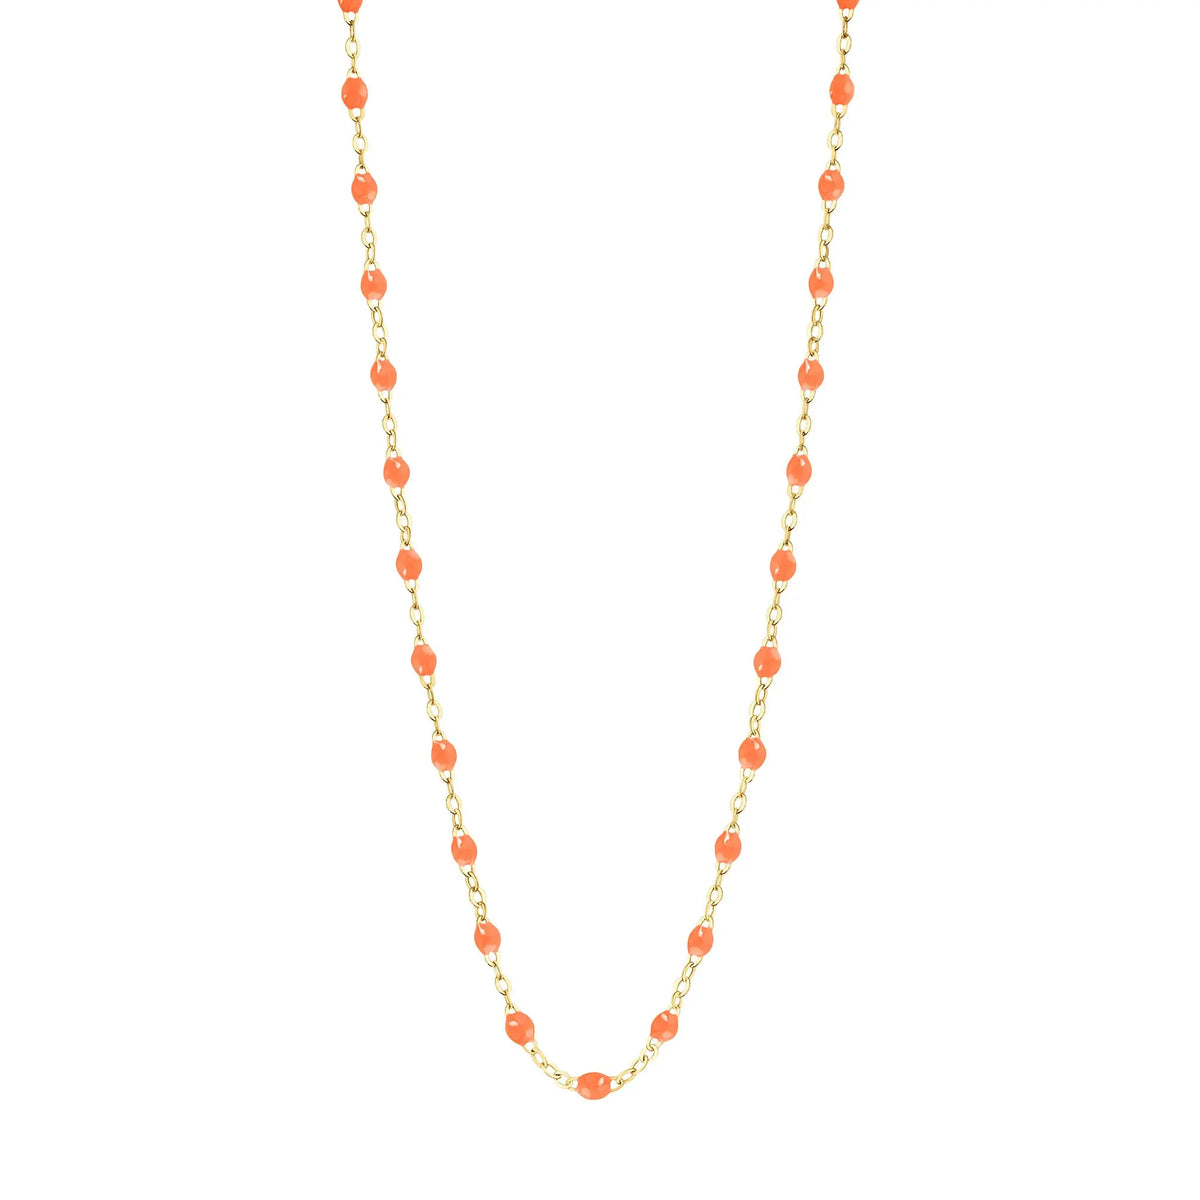 Stack you necklace layers with this versatile beaded chain! The Classic Gigi Necklace by gigi CLOZEAU features 18 carat yellow gold, and striking Orange resin jewels for an everyday effortless appearance. Handcrafted in 18k yellow gold. The beads measure 1.50mm in diameter and is finished with a spring ring clasp. The length is 16.5 inches.